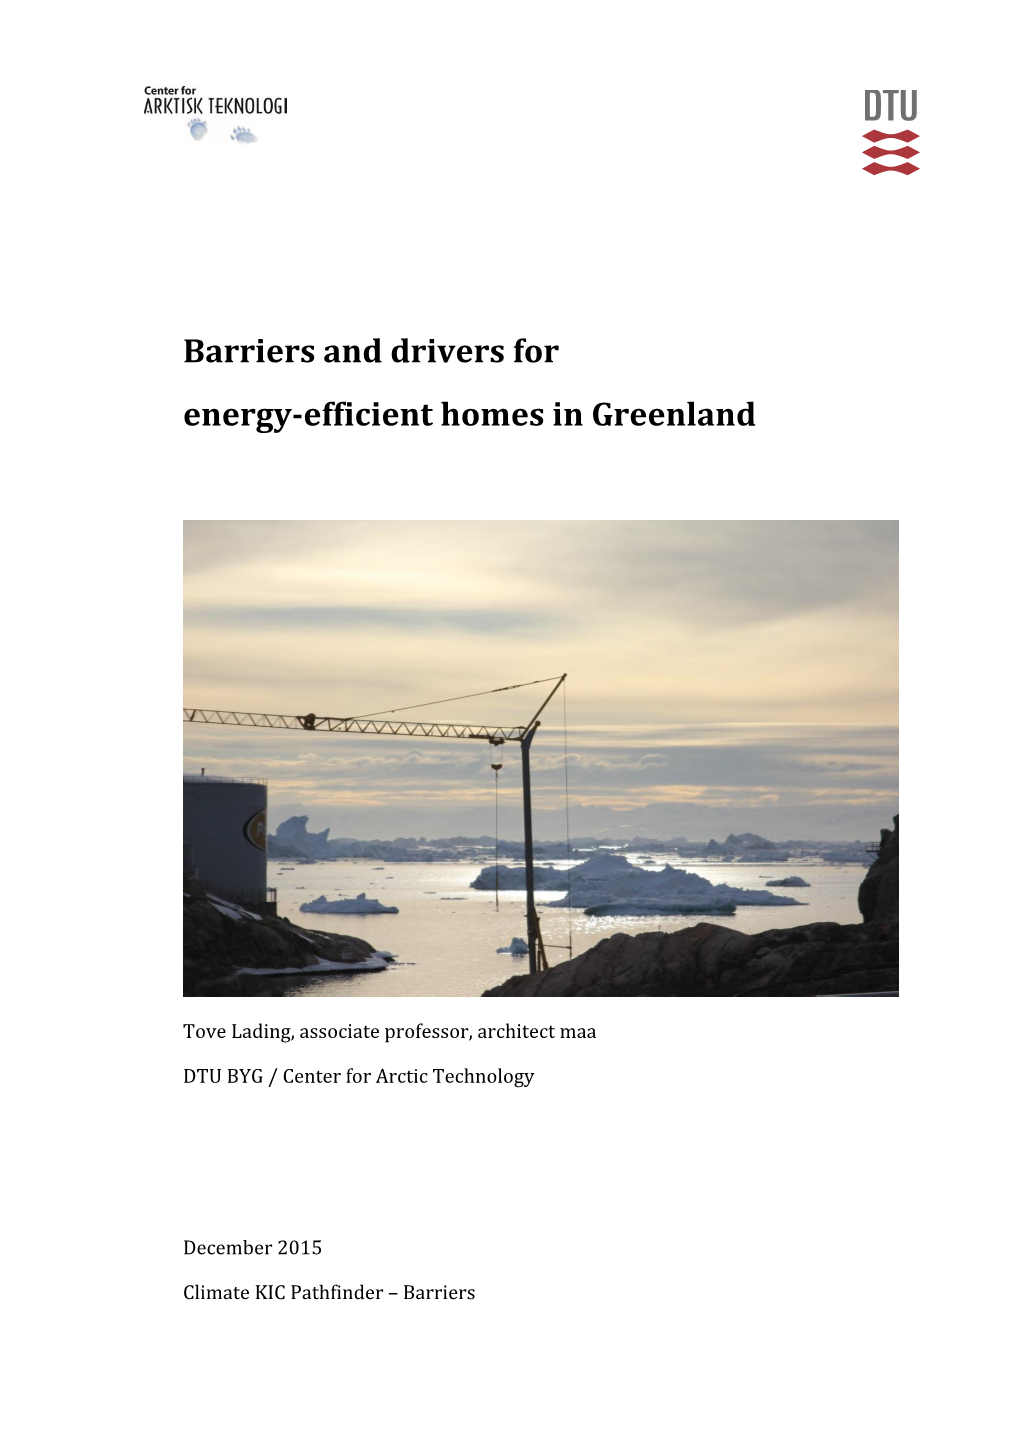 Barriers and Drivers for Energy-Efficient Homes in Greenland